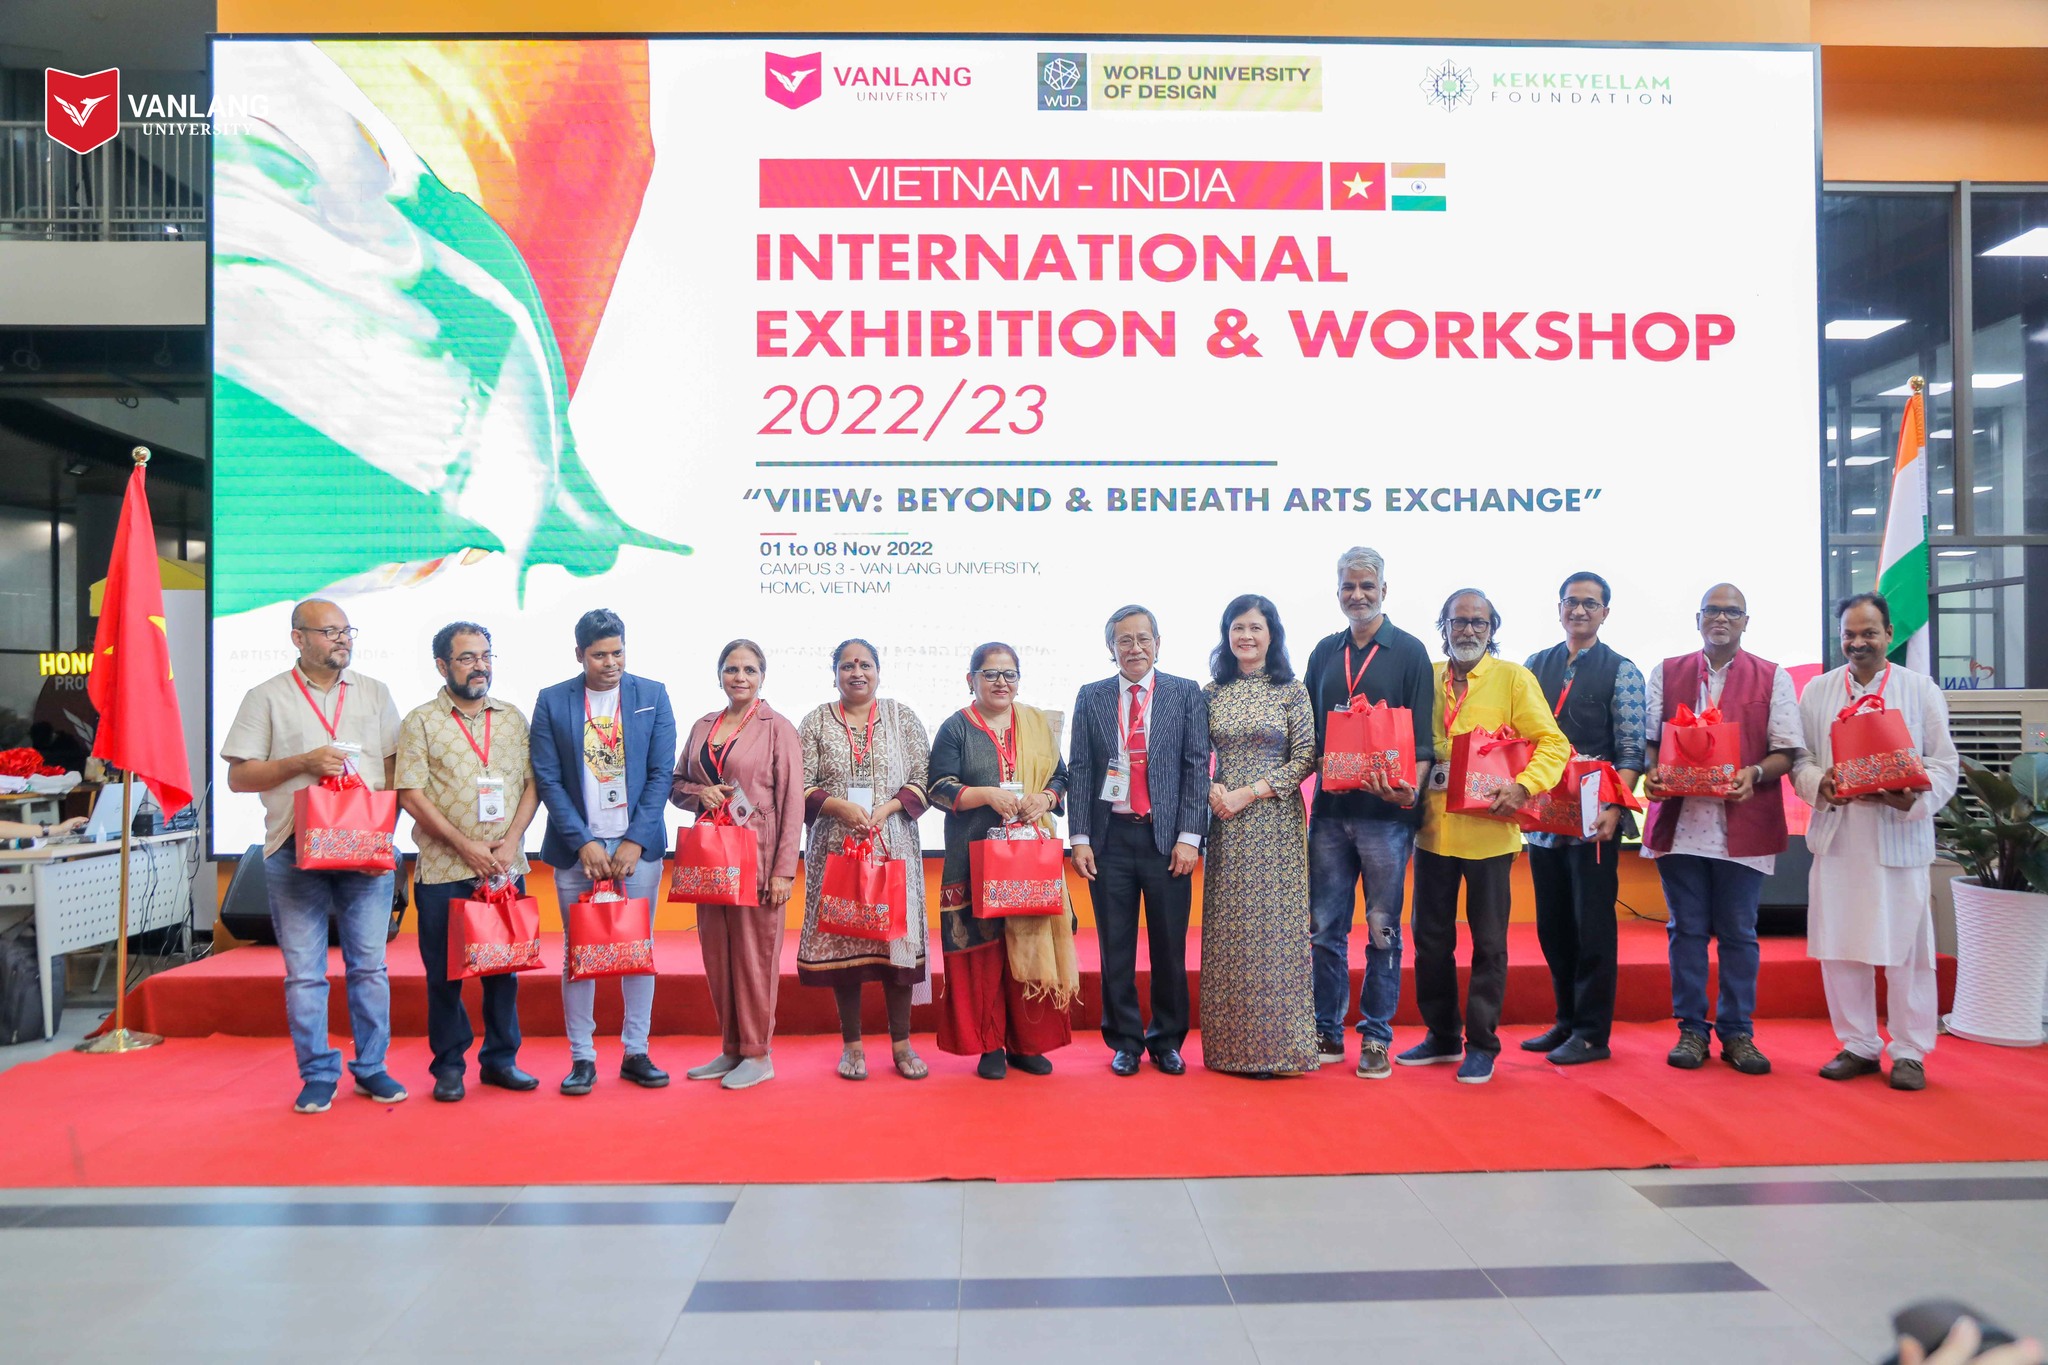 THE CLOSING CEREMONY OF THE VIETNAM - INDIA ART CAMP IN 2022 AND THE OPENING CEREMONY OF THE ART EXHIBITION WITH THE THEME “BEYOND AND BENEATH ARTS EXCHANGE"